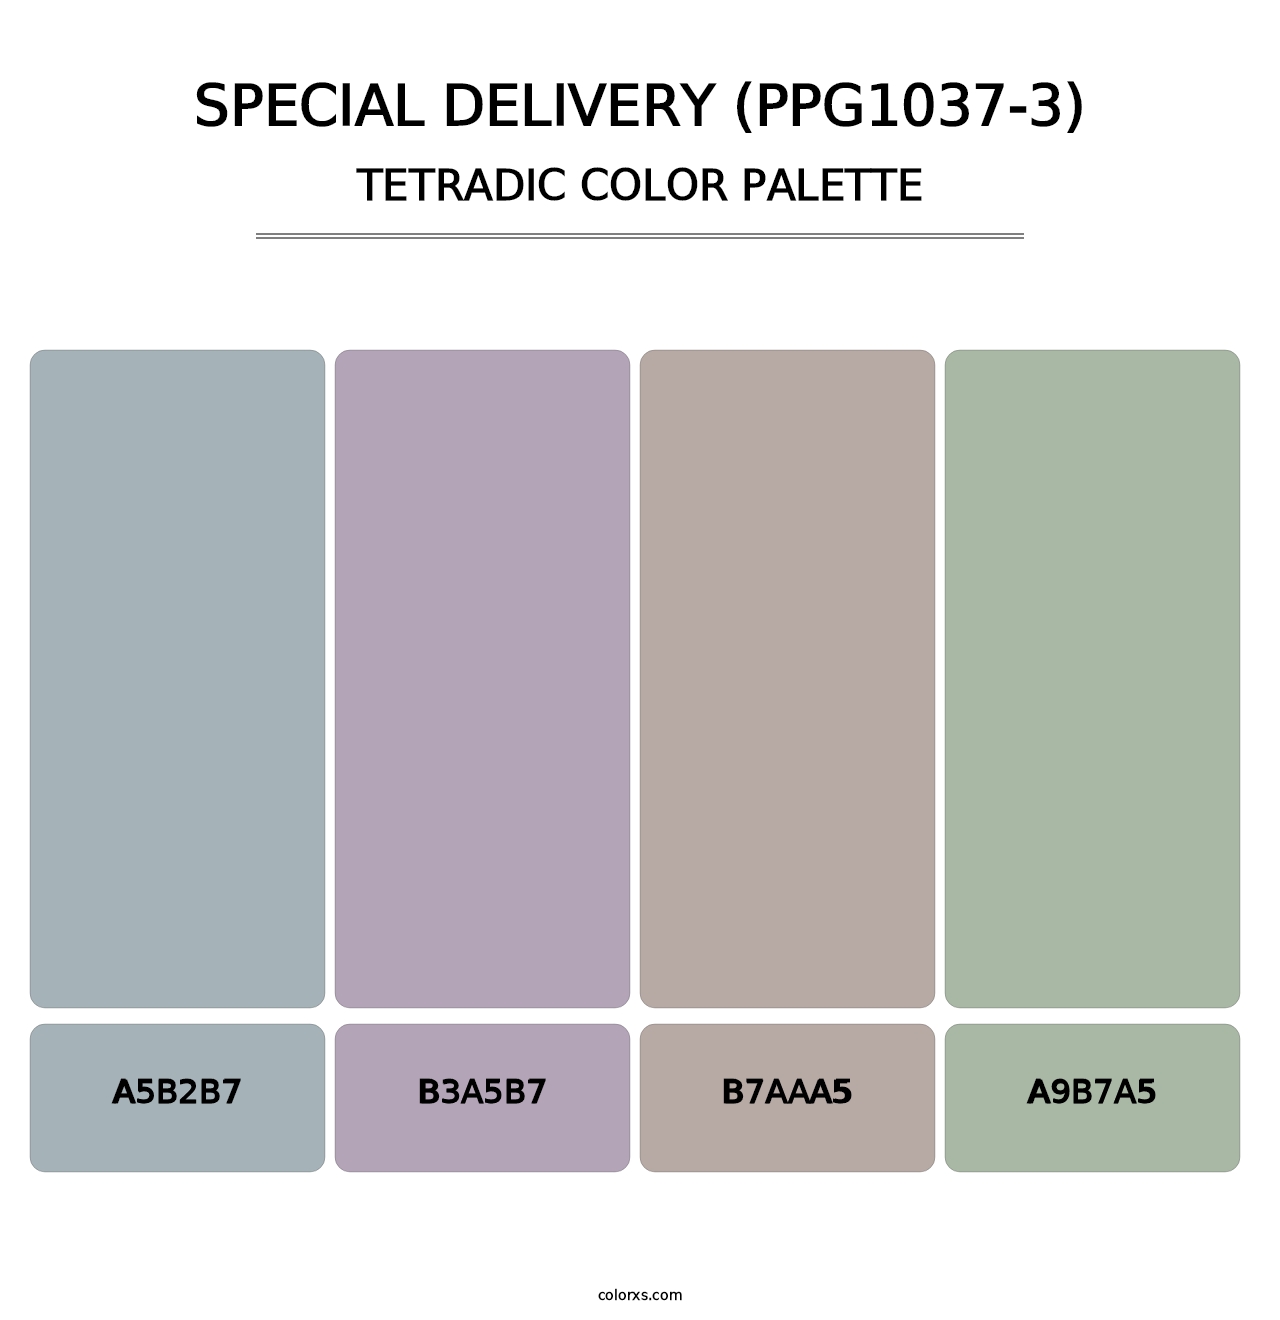 Special Delivery (PPG1037-3) - Tetradic Color Palette